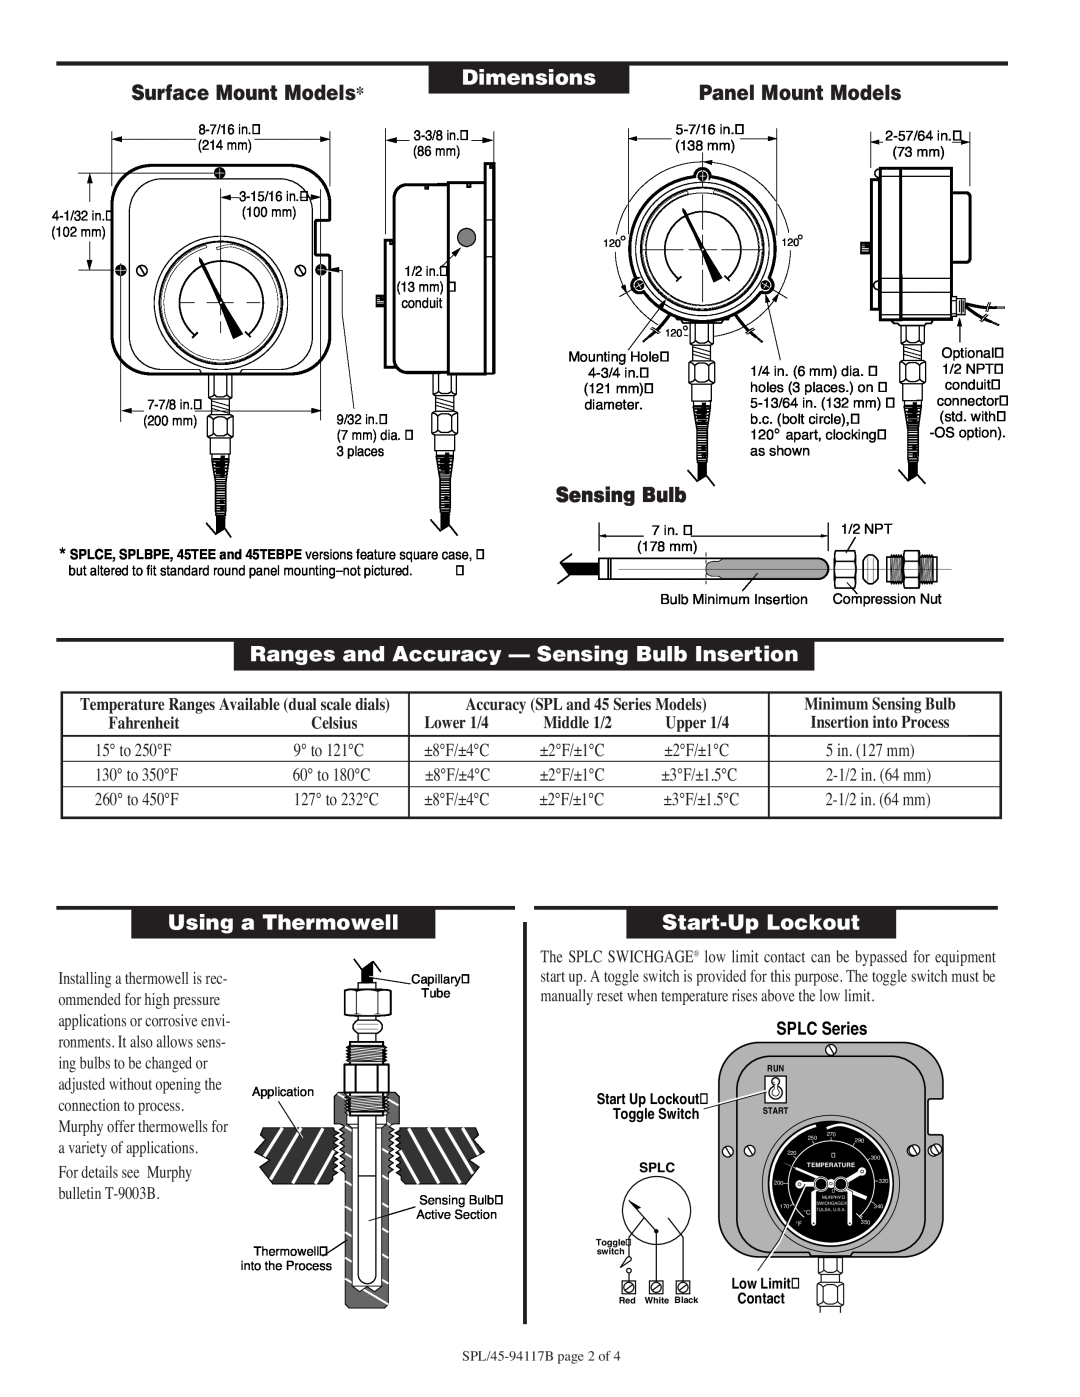 Murphy SPL Surface Mount Models, Dimensions, Panel Mount Models, Sensing Bulb, Using a Thermowell, Start-Up Lockout 